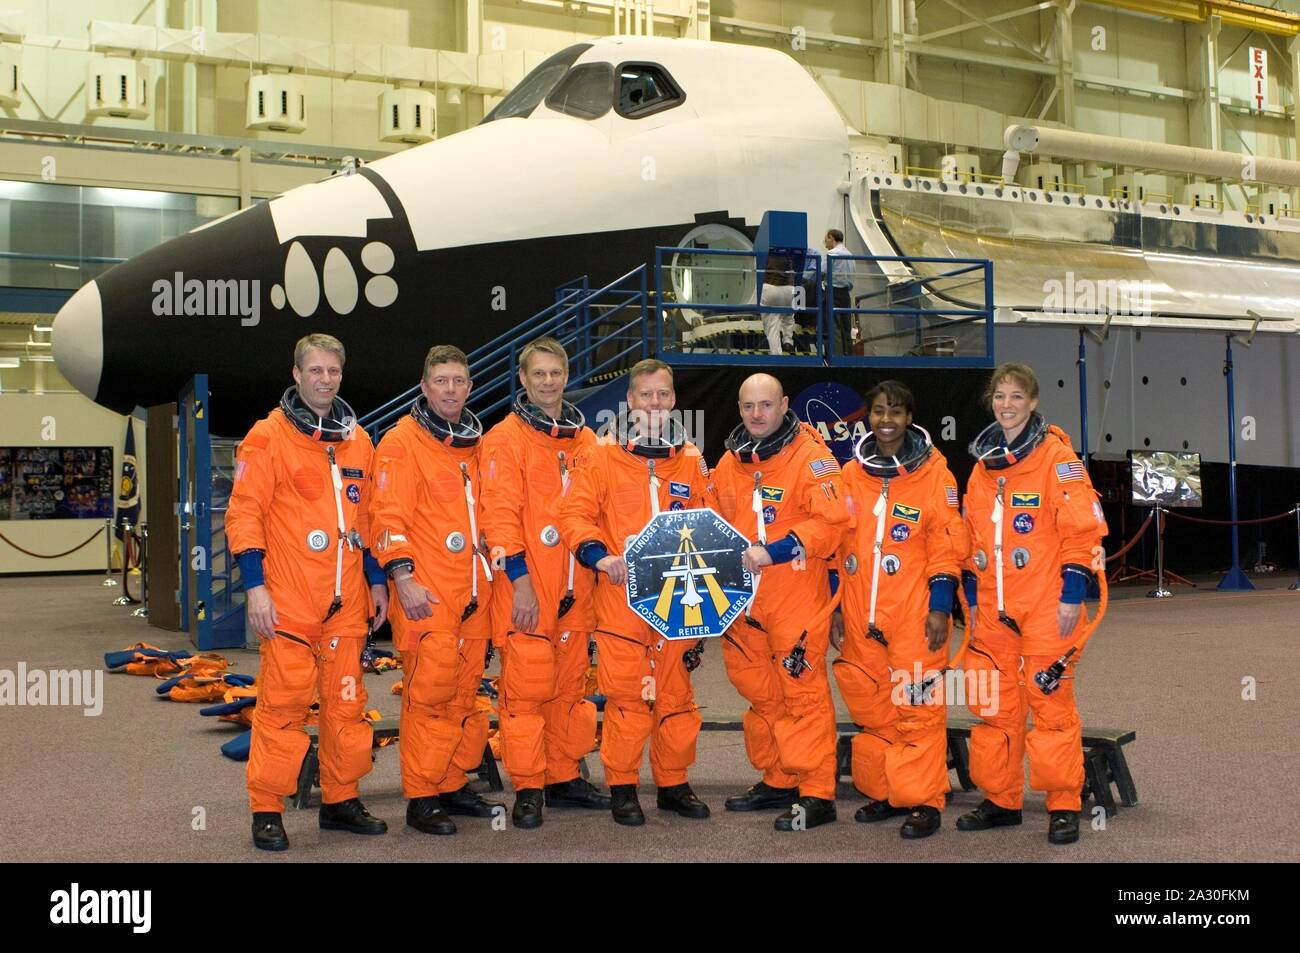 FILE: In this photo released by NASA, The crew members assigned to STS-121 take a break from training for a group shot in the Johnson Space Center's Space Vehicle Mockup Facility in Houston, Texas on March 21, 2006. From the left are astronauts Thomas Reiter of the European Space Agency, Michael E. Fossum, Piers J. Sellers, Steven W. Lindsey, Mark E. Kelly, Stephanie D. Wilson and Lisa M. Nowak. Lindsey is mission commander and Kelly is pilot, with the other five serving as mission specialists. Once onboard the International Space Station, Reiter, who flew for six months on the Russian space Stock Photo